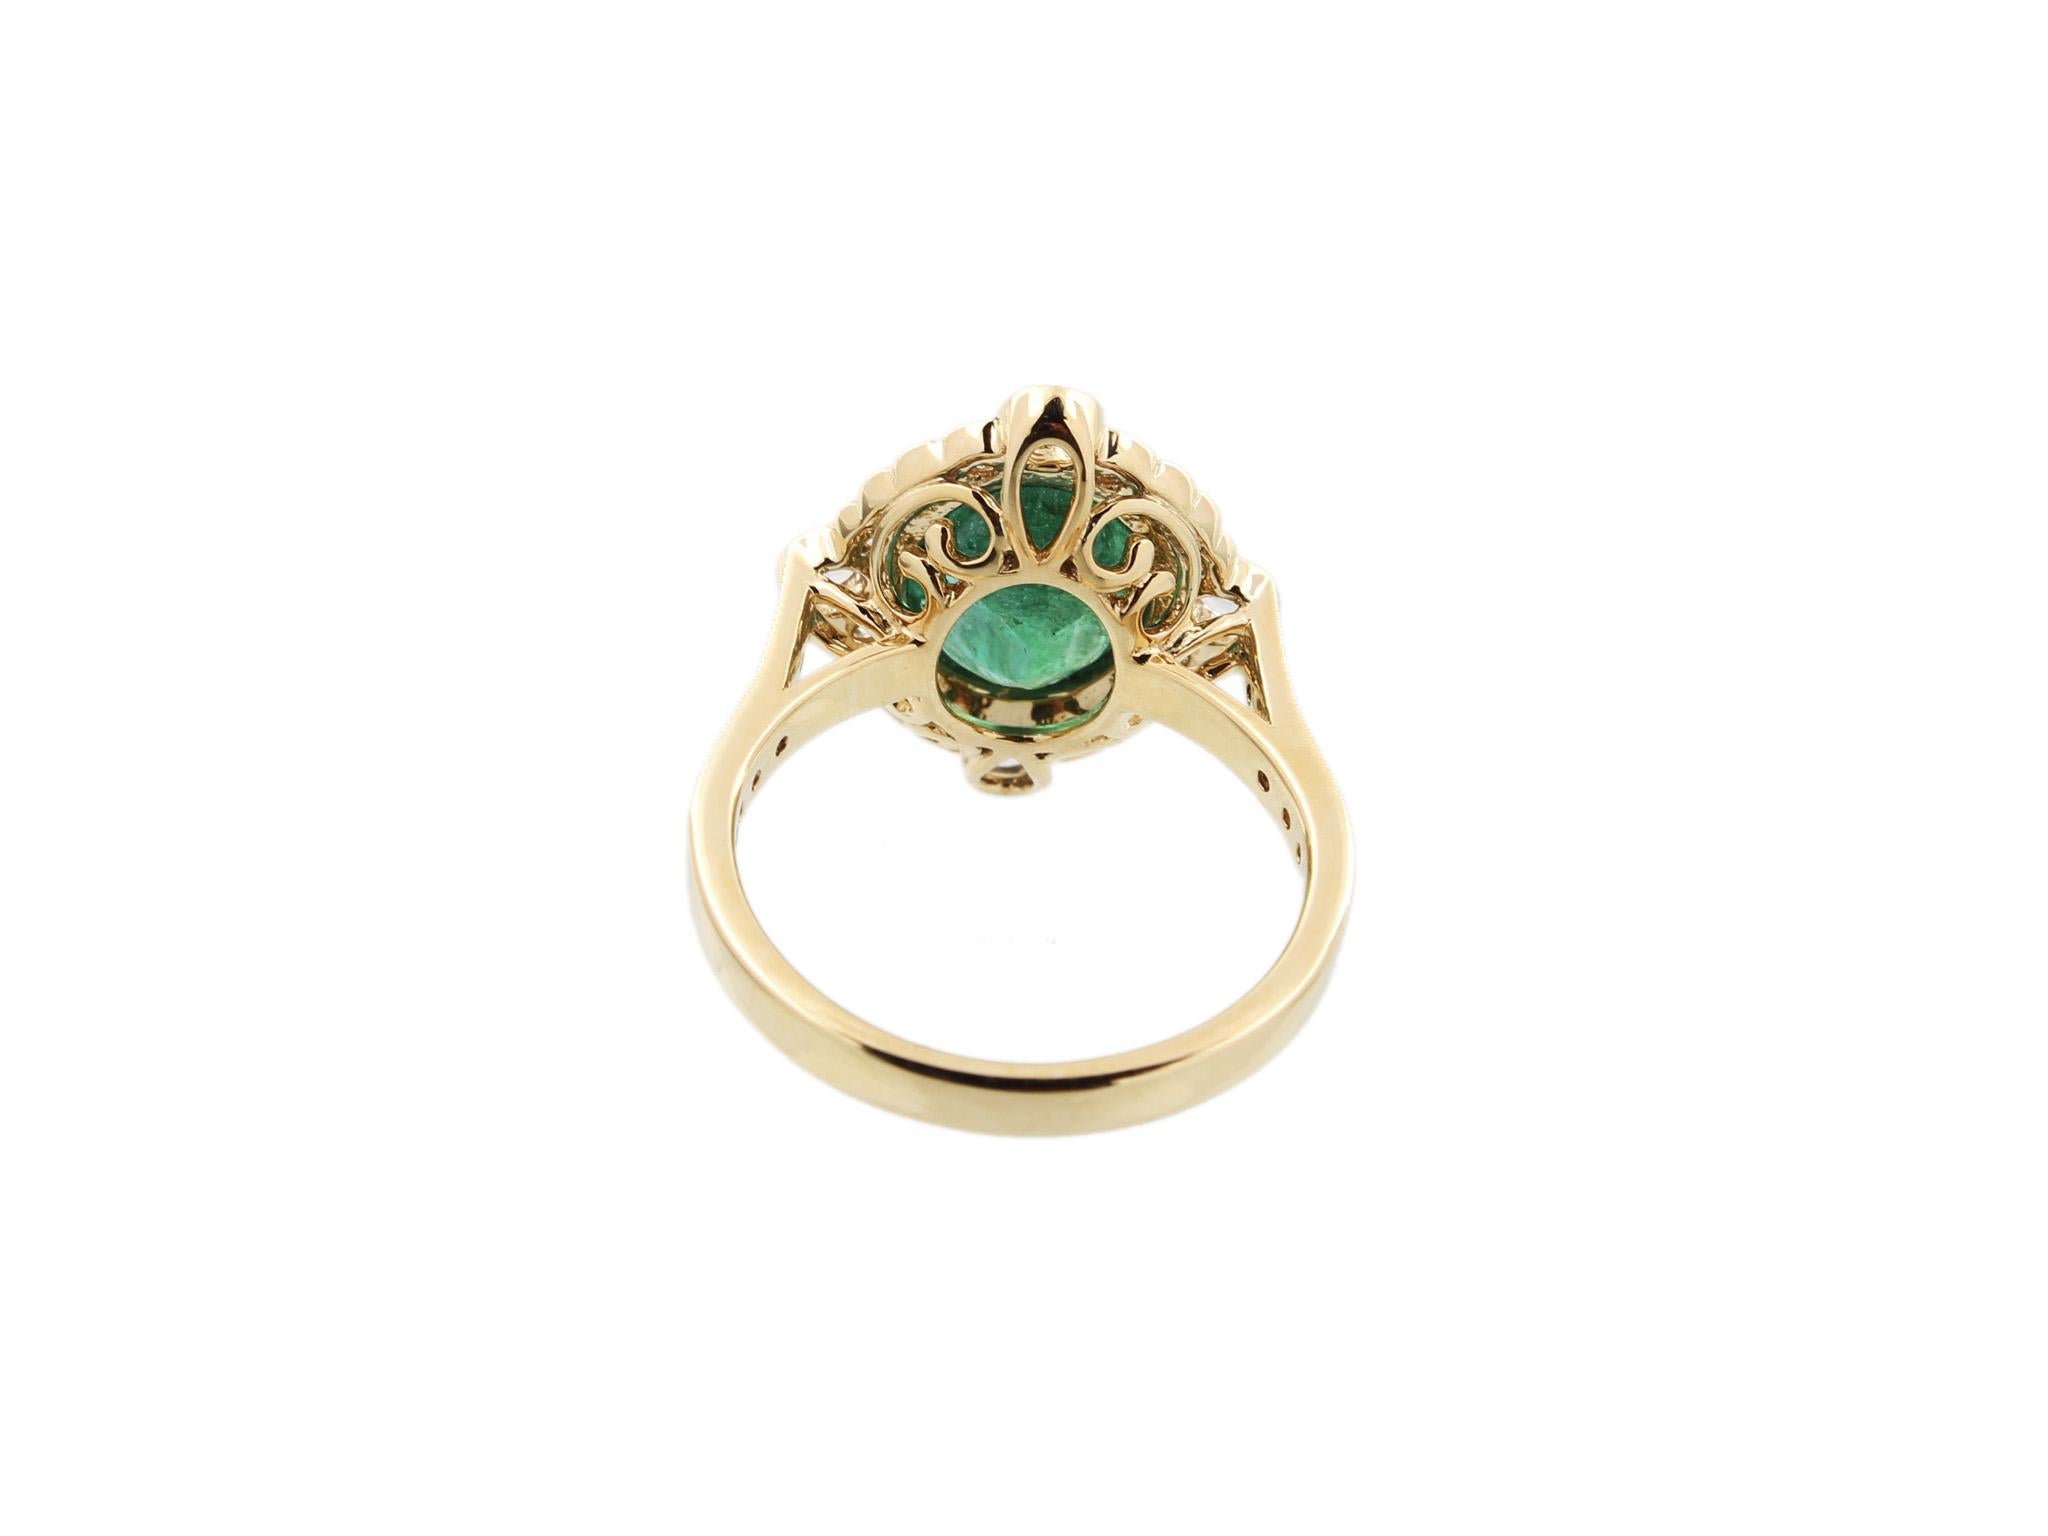 This is an elegant emerald & diamond ring studded in 18k gold with 1 piece of Carved Zambian emerald weight 2.47 carat which is surrounded by 32 pieces of weight 0.67 carat, this entire ring studded in 18k gold

ring size can be change as per the